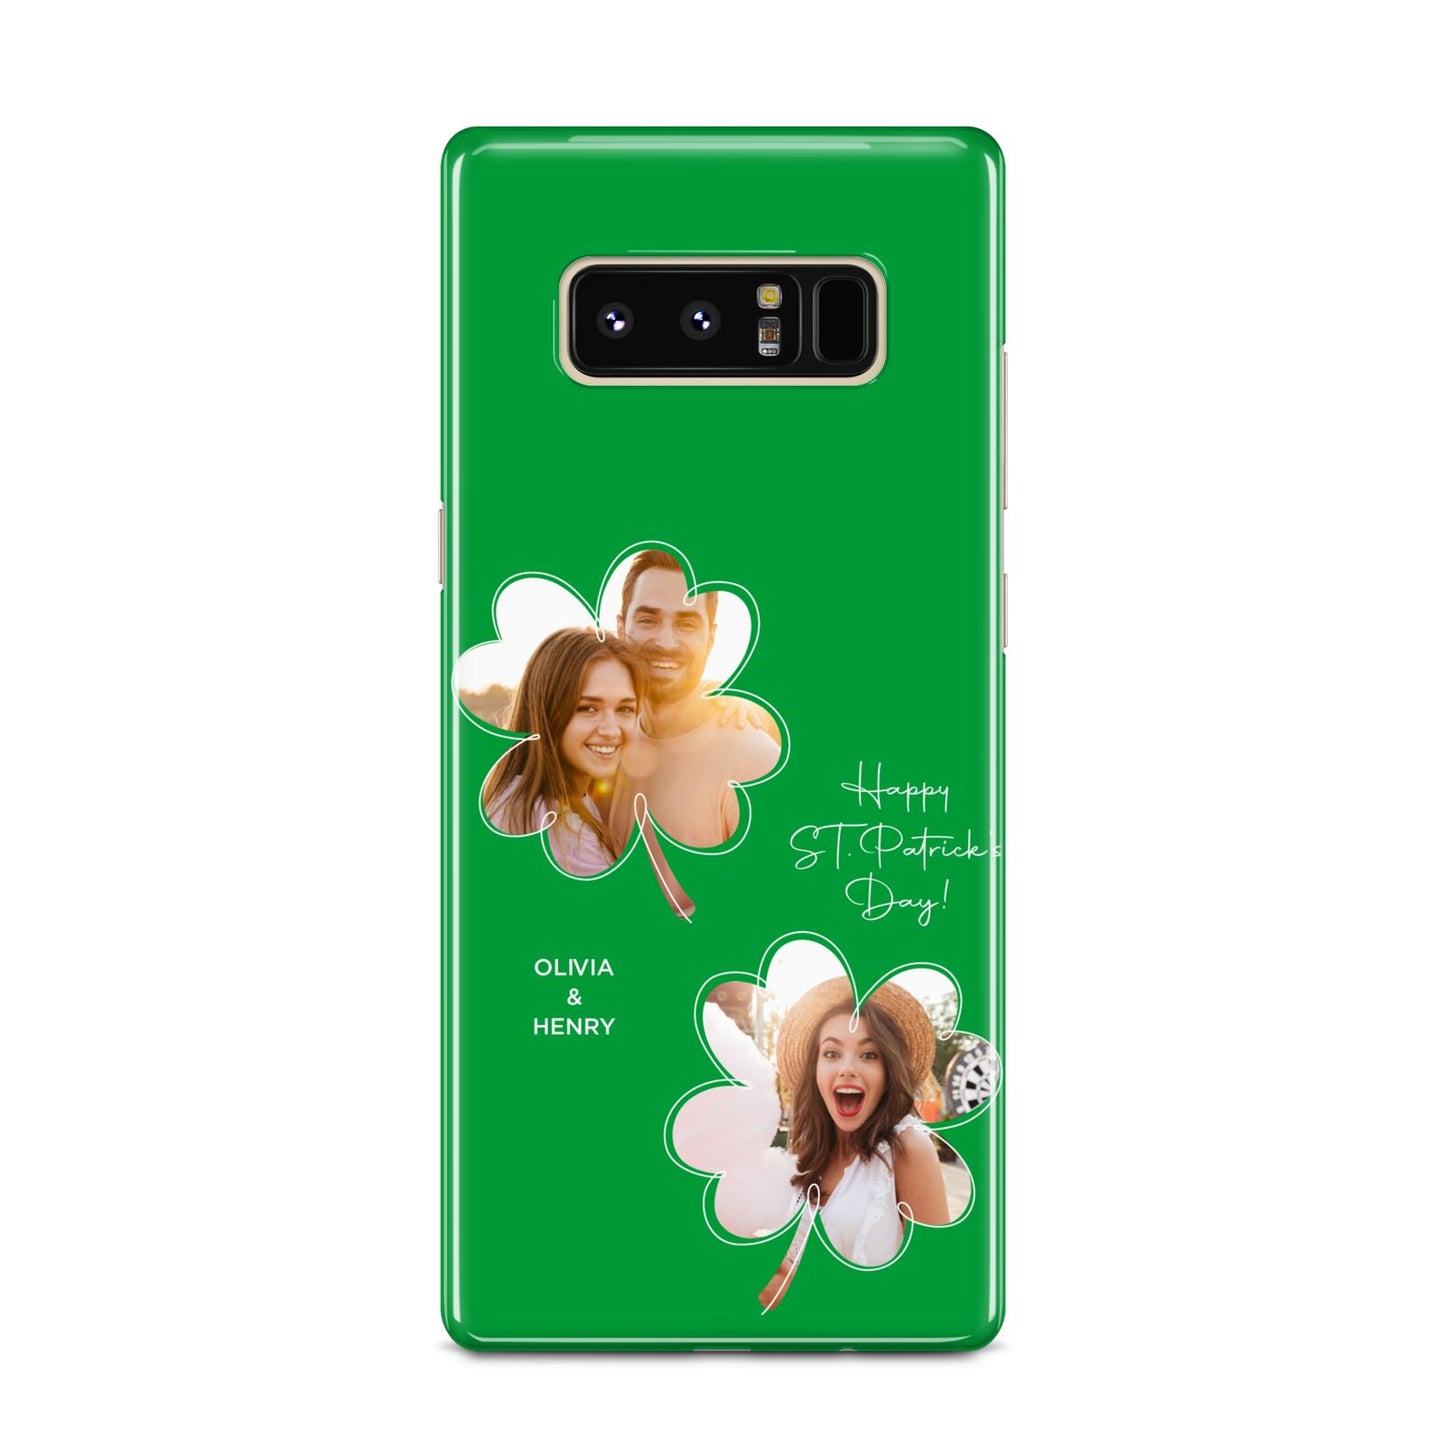 Personalised Photo St Patricks Day Samsung Galaxy Note 8 Case